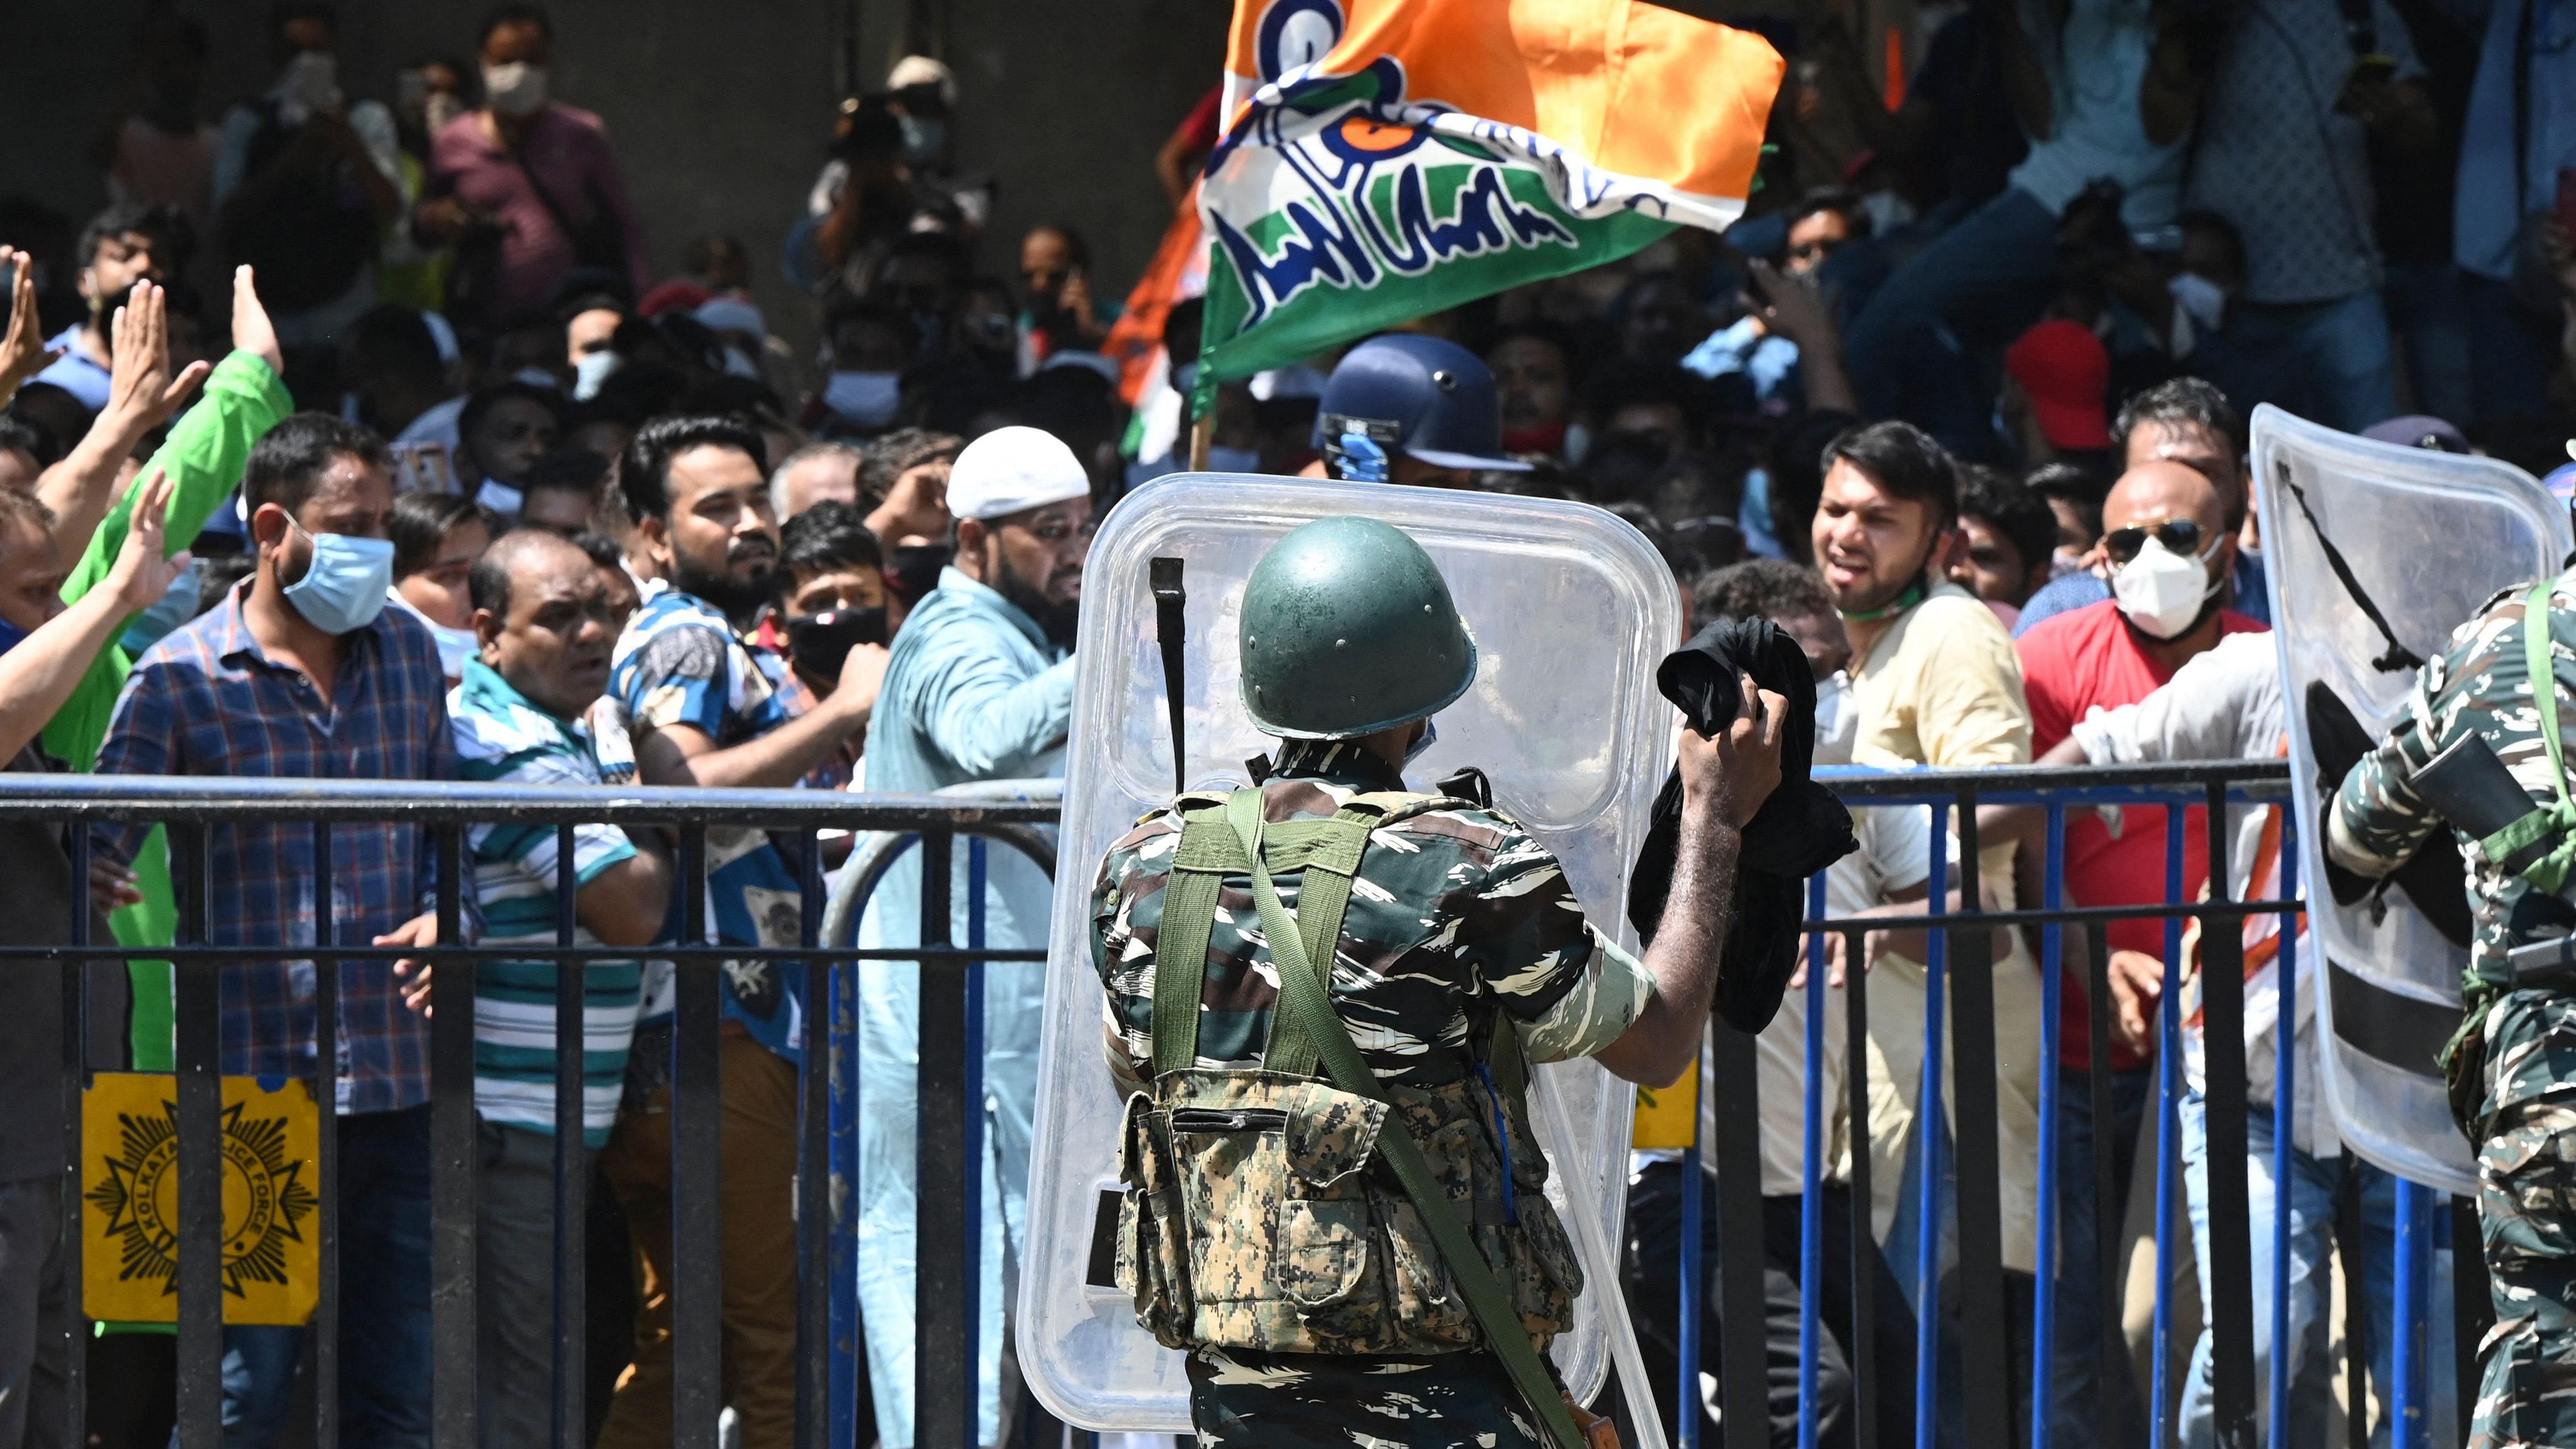 A paramilitary personnel stands guard at the gate of the Central Bureau of Investigation (CBI) office as Trinamool Congress (TMC) supporters shout slogans after the CBI arrested four Trinamool Congress (TMC) leaders in connection with the 2016 Narada sting operation case. Credit: AFP File Photo